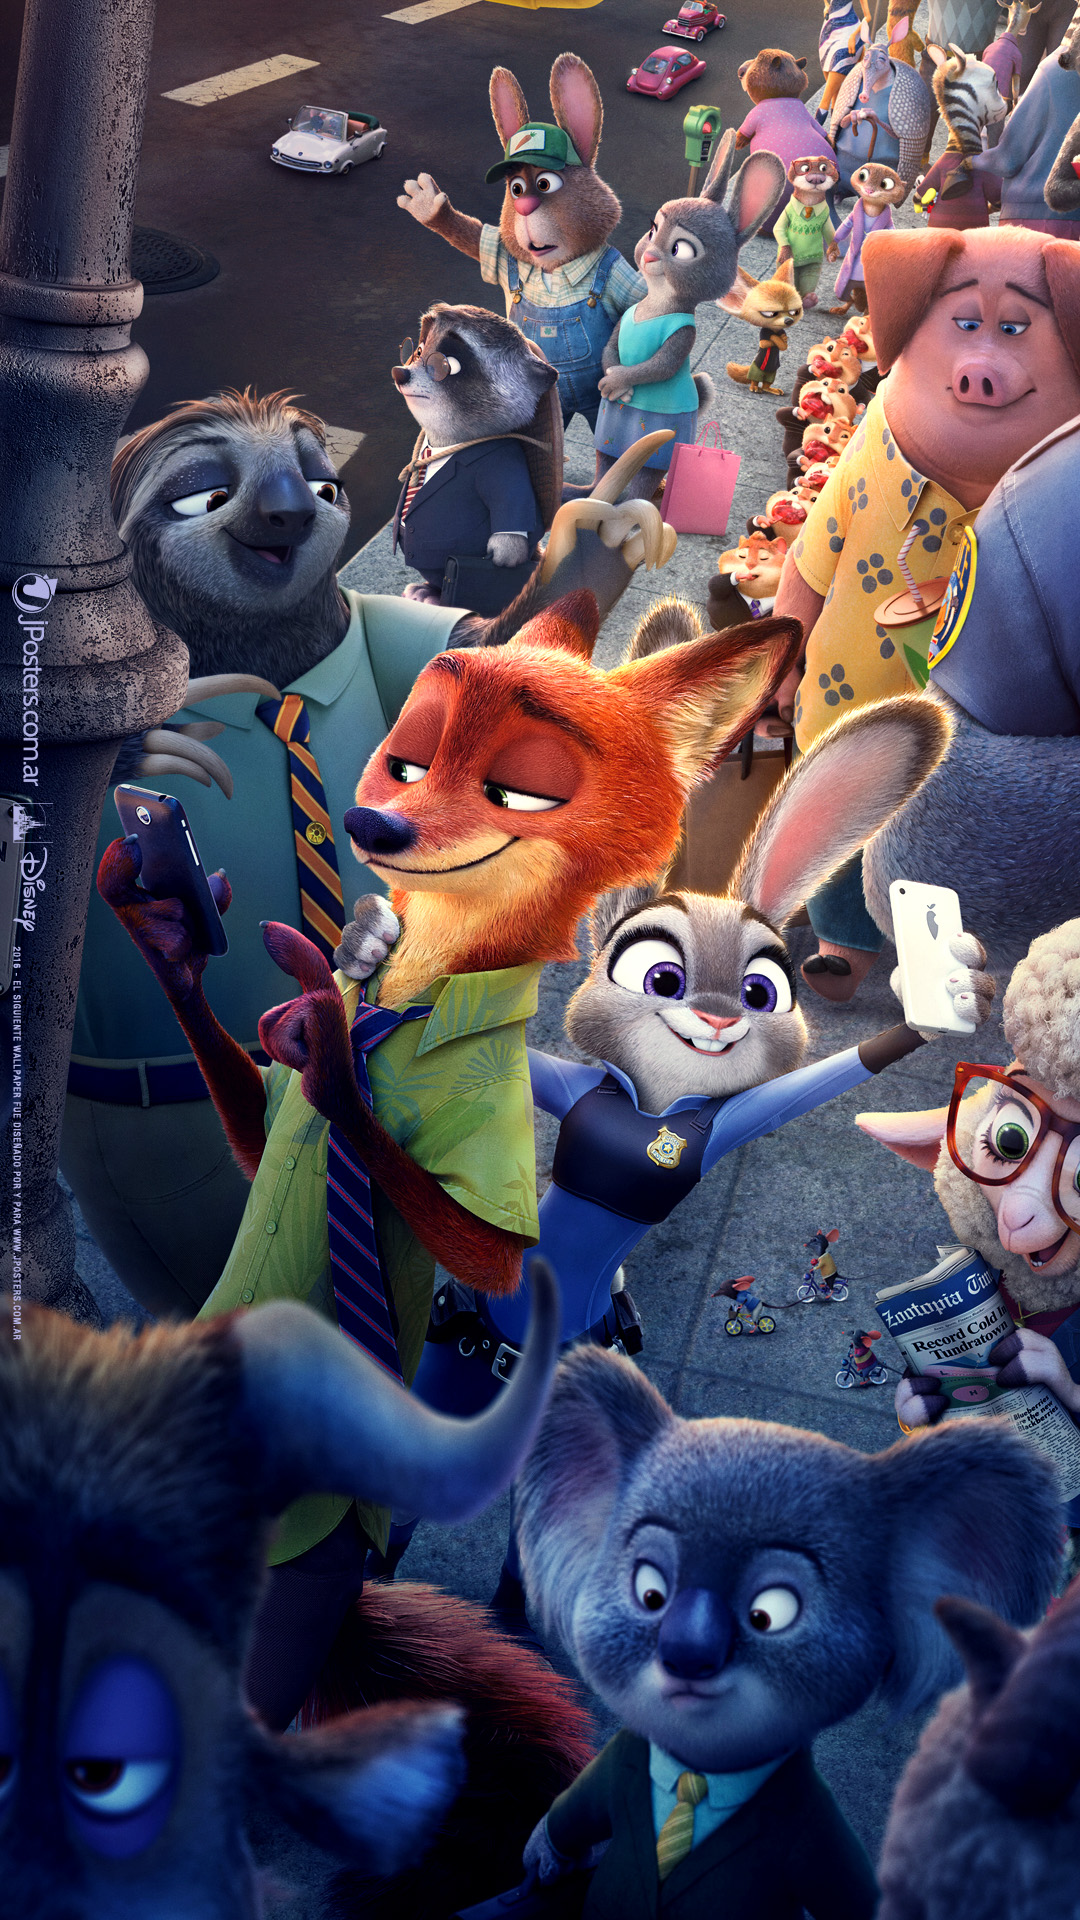 Zootopia Selfies wallpaper by ZootopiaGaming  Download on ZEDGE  4eb2